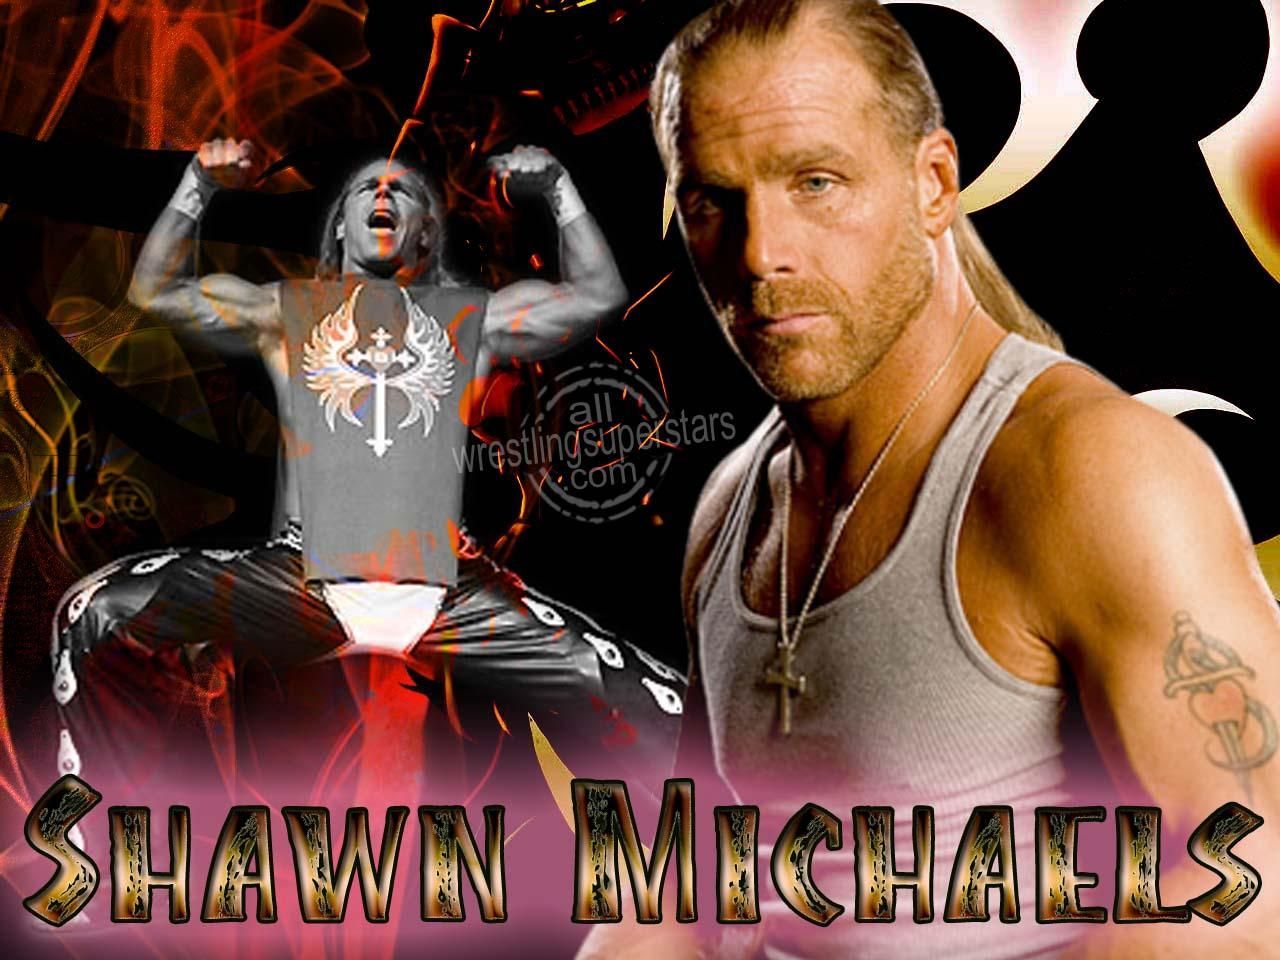 Who remembers the WWF? The good old days with Shawn Michaels